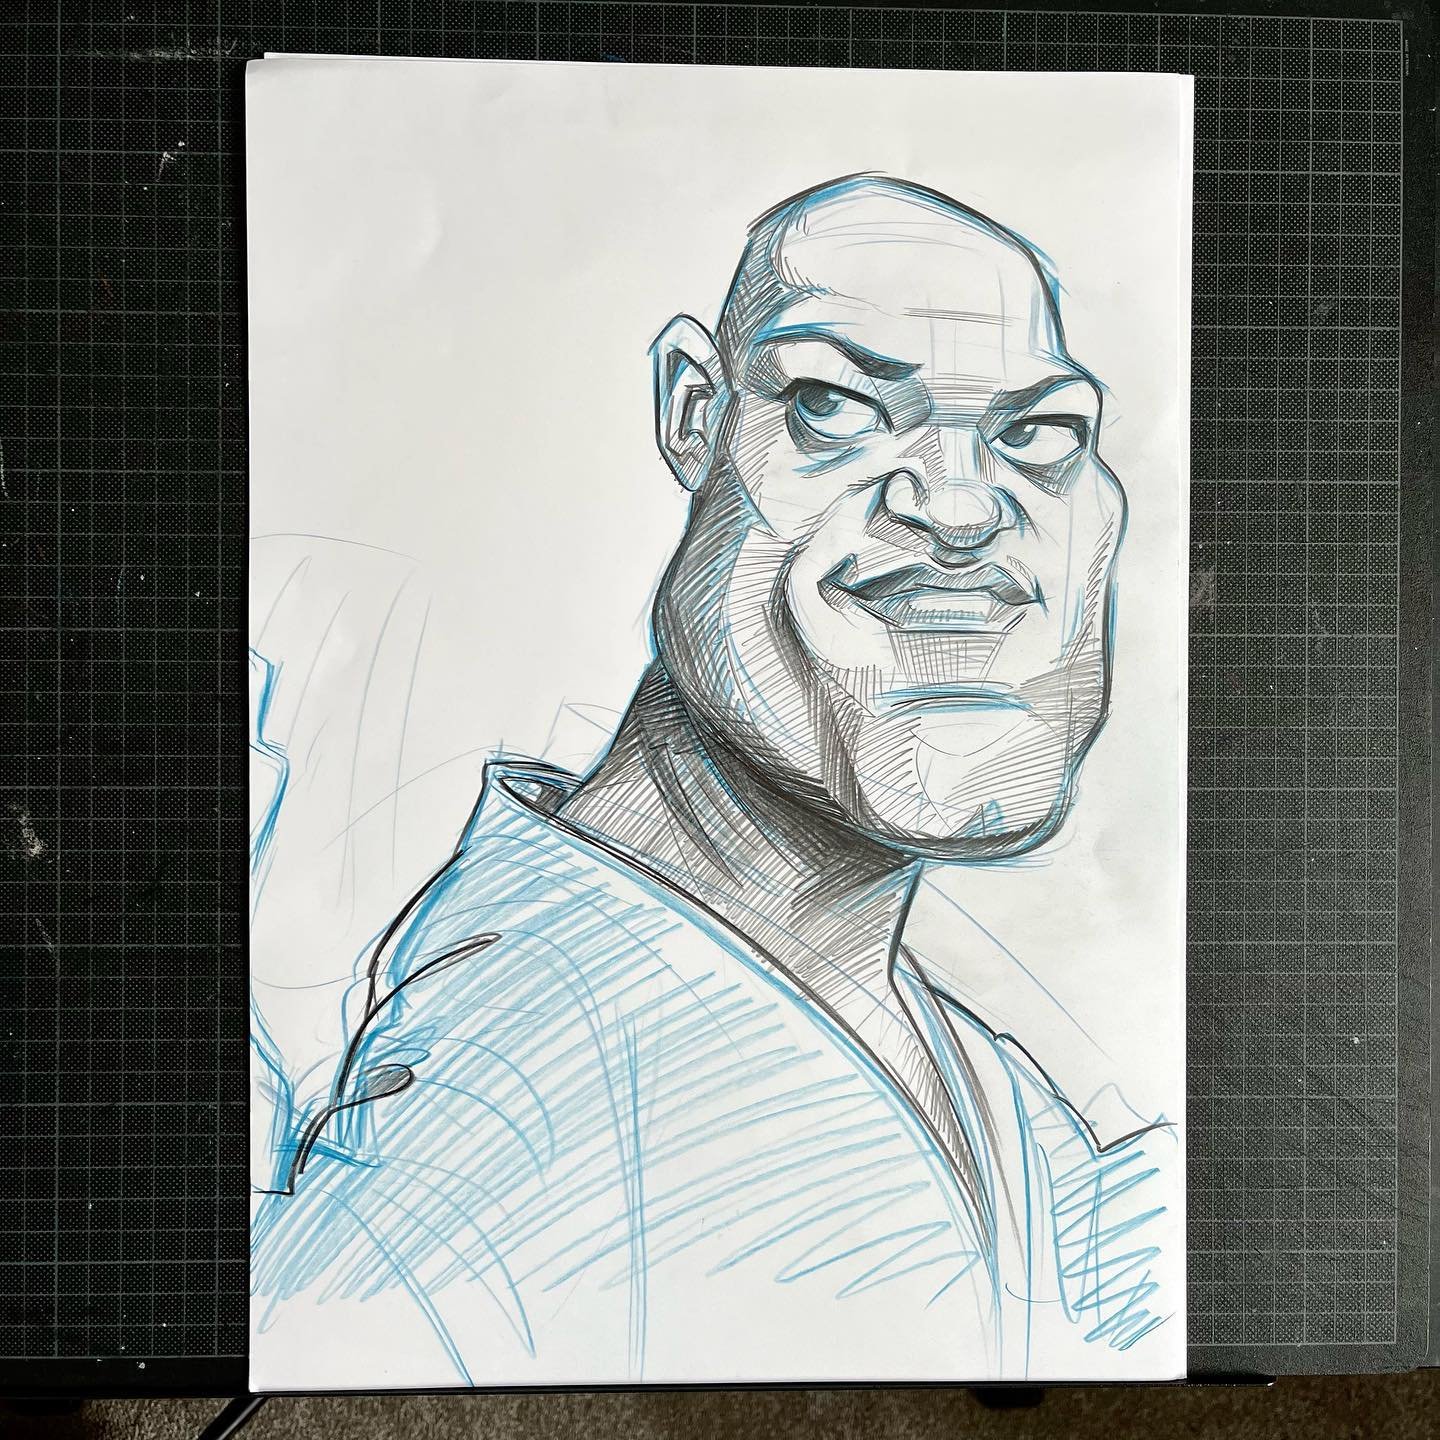 Here&rsquo;s a closer look at the Laurence Fishburne sketch I shared in a process reel earlier, swipe to see my reference. Needs some work on the body situation, but it&rsquo;s a decent start.

#morpheus #thematrix #laurencefishburne #showme #pencils